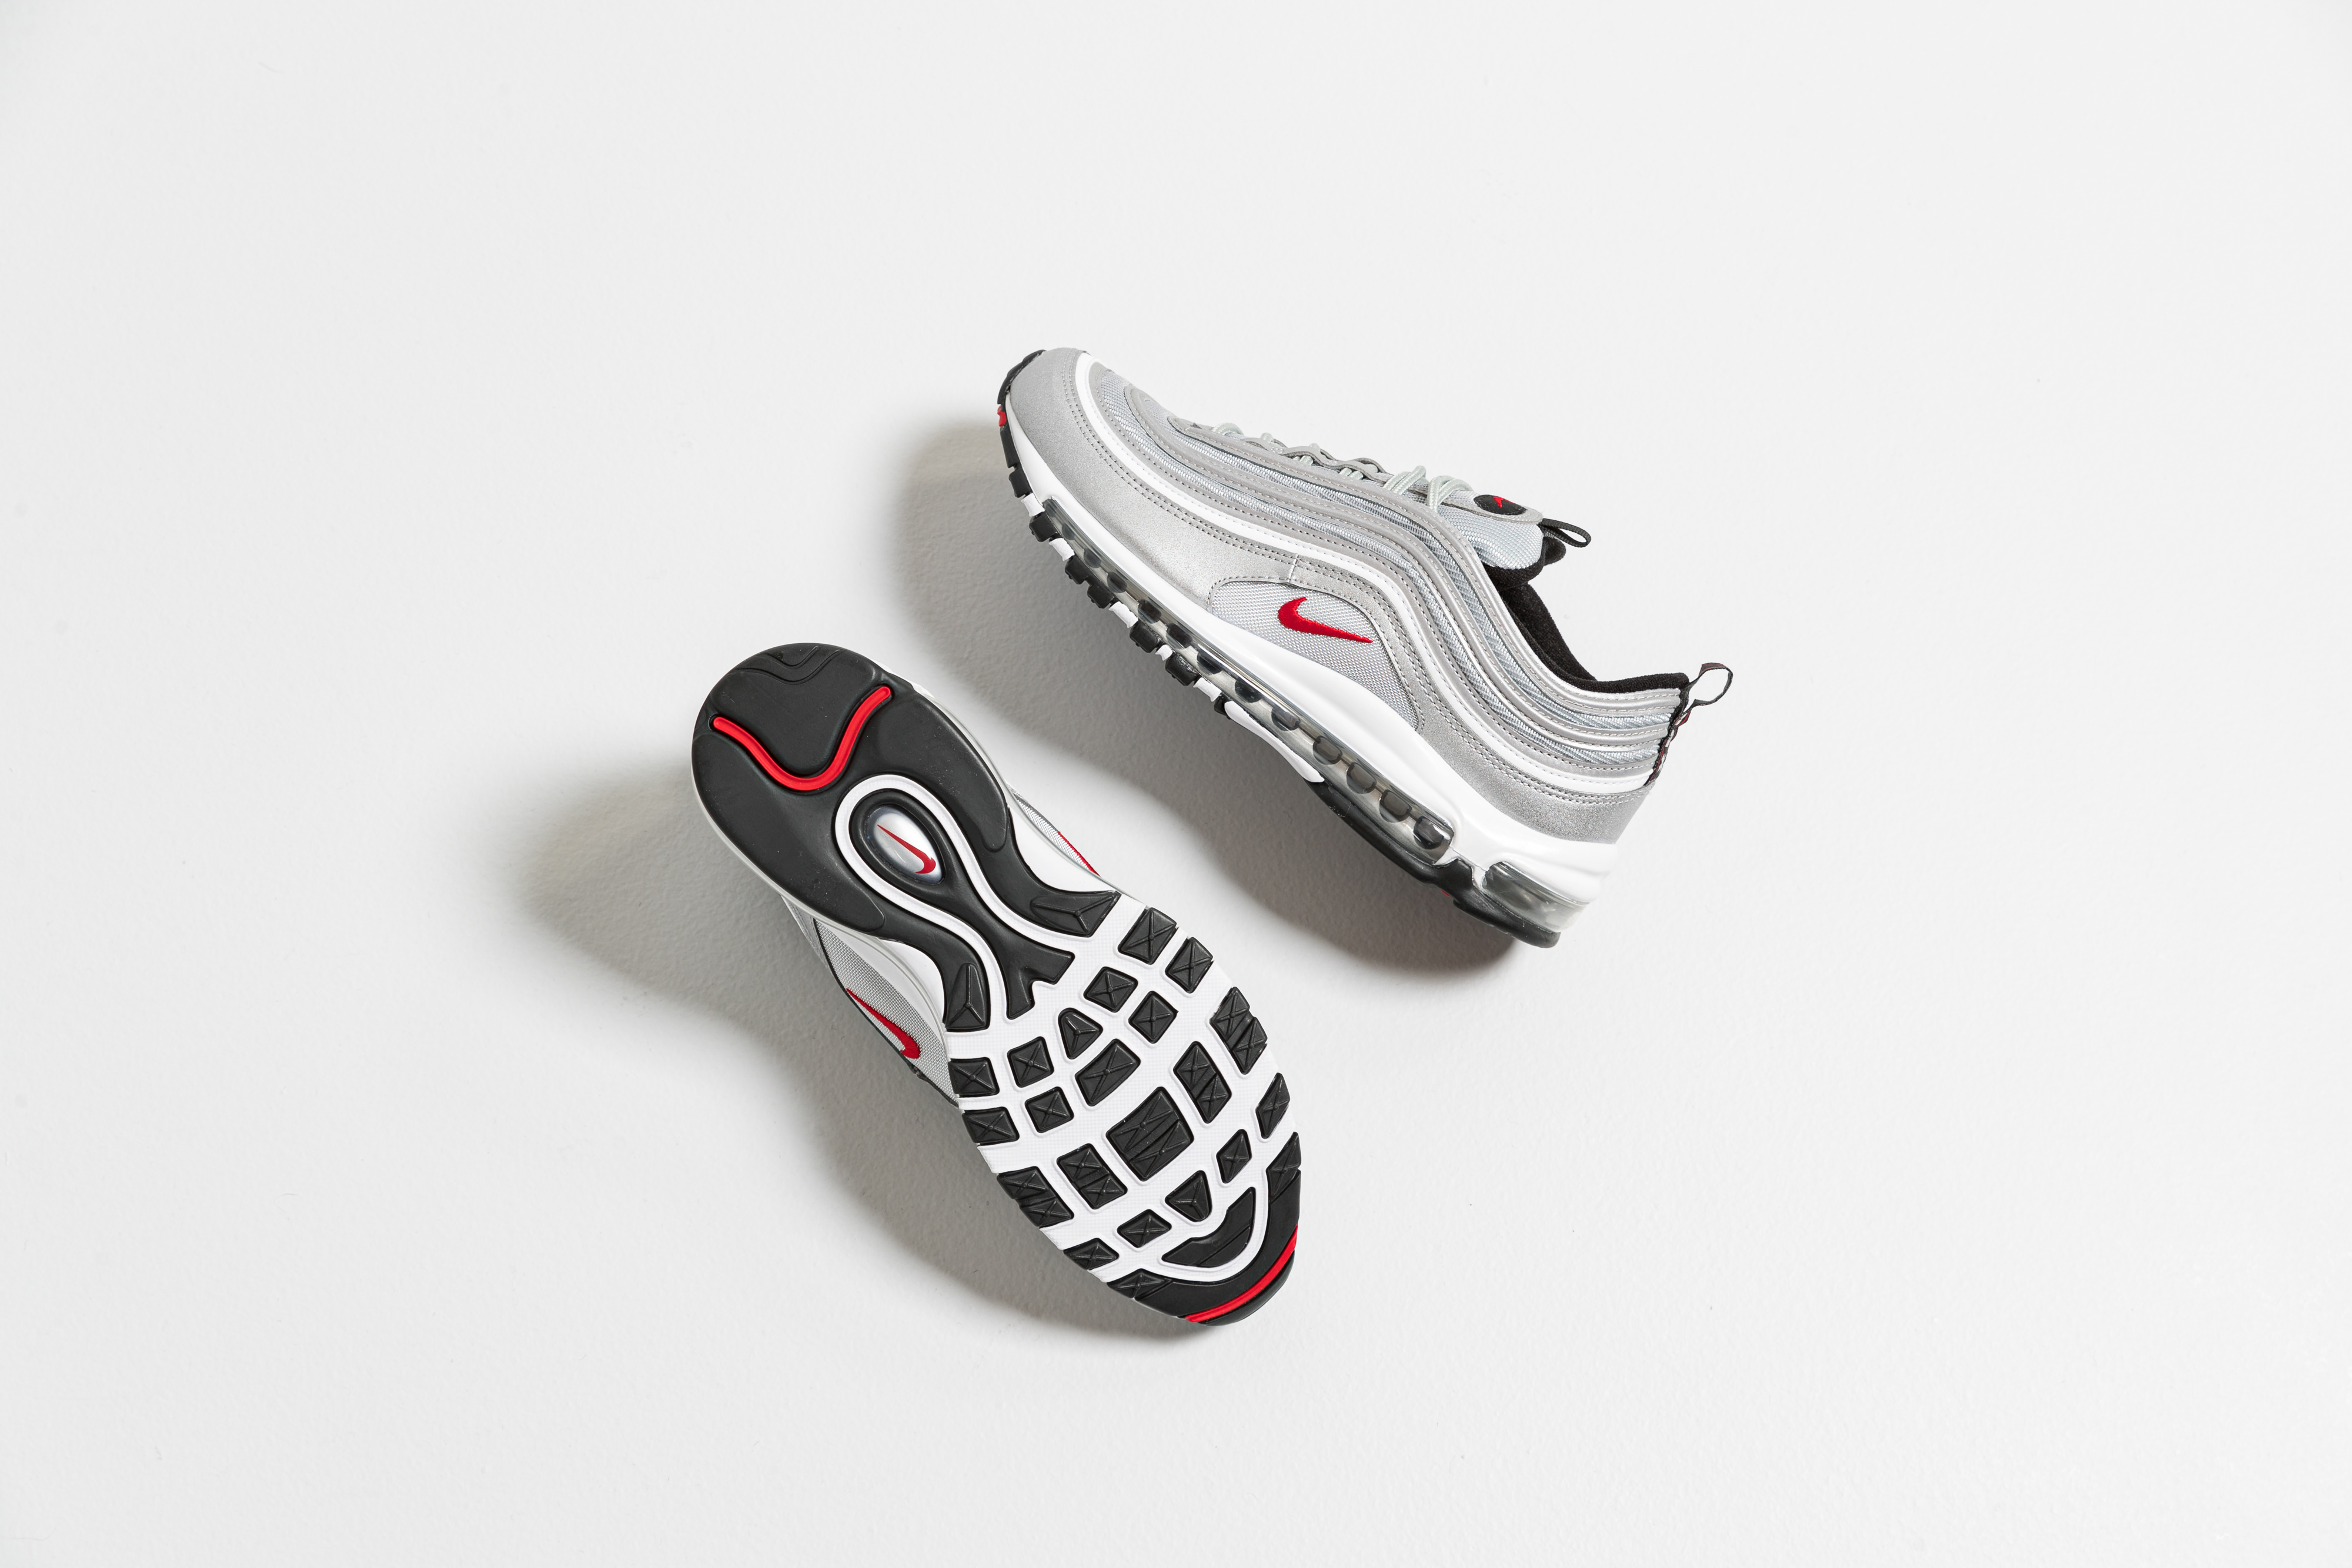 Up There Store - 25 Years of the Future - Nike Air Max 97 Silver Bullet